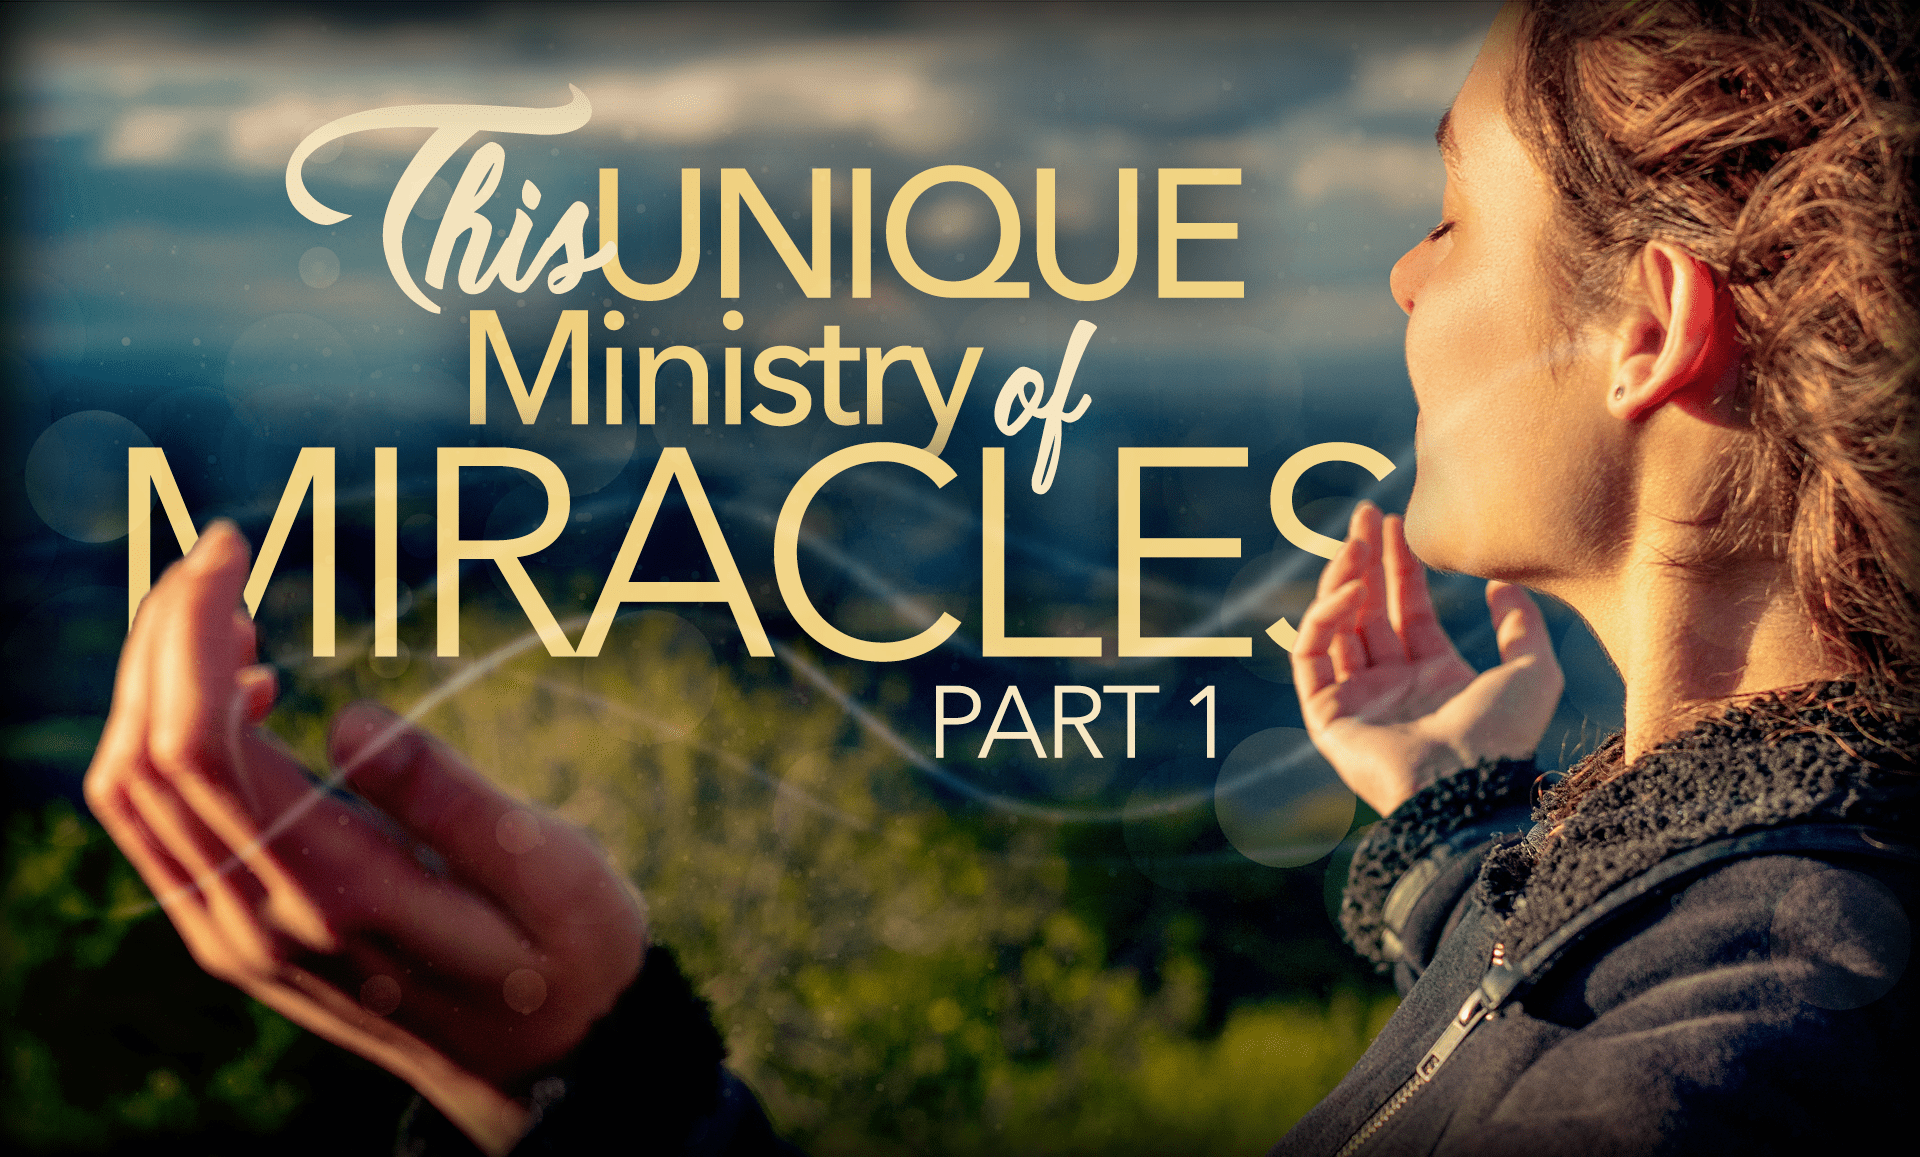 This Unique Ministry of Miracles Pt1